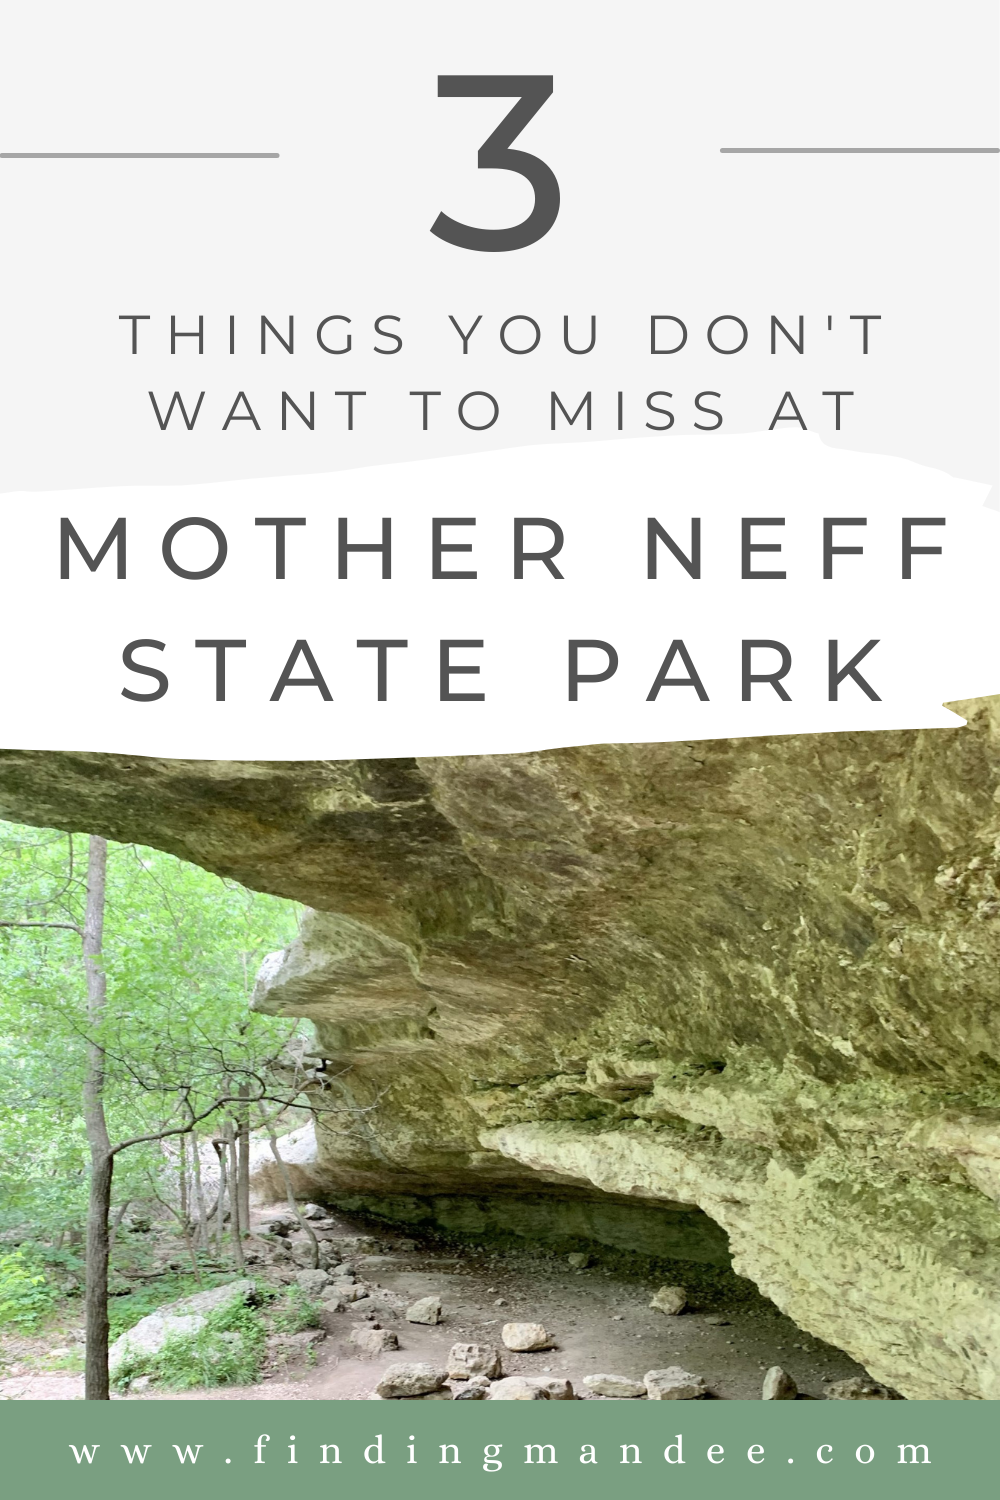 3 Things You Don't Want to Miss at Mother Neff State Park | Finding Mandee